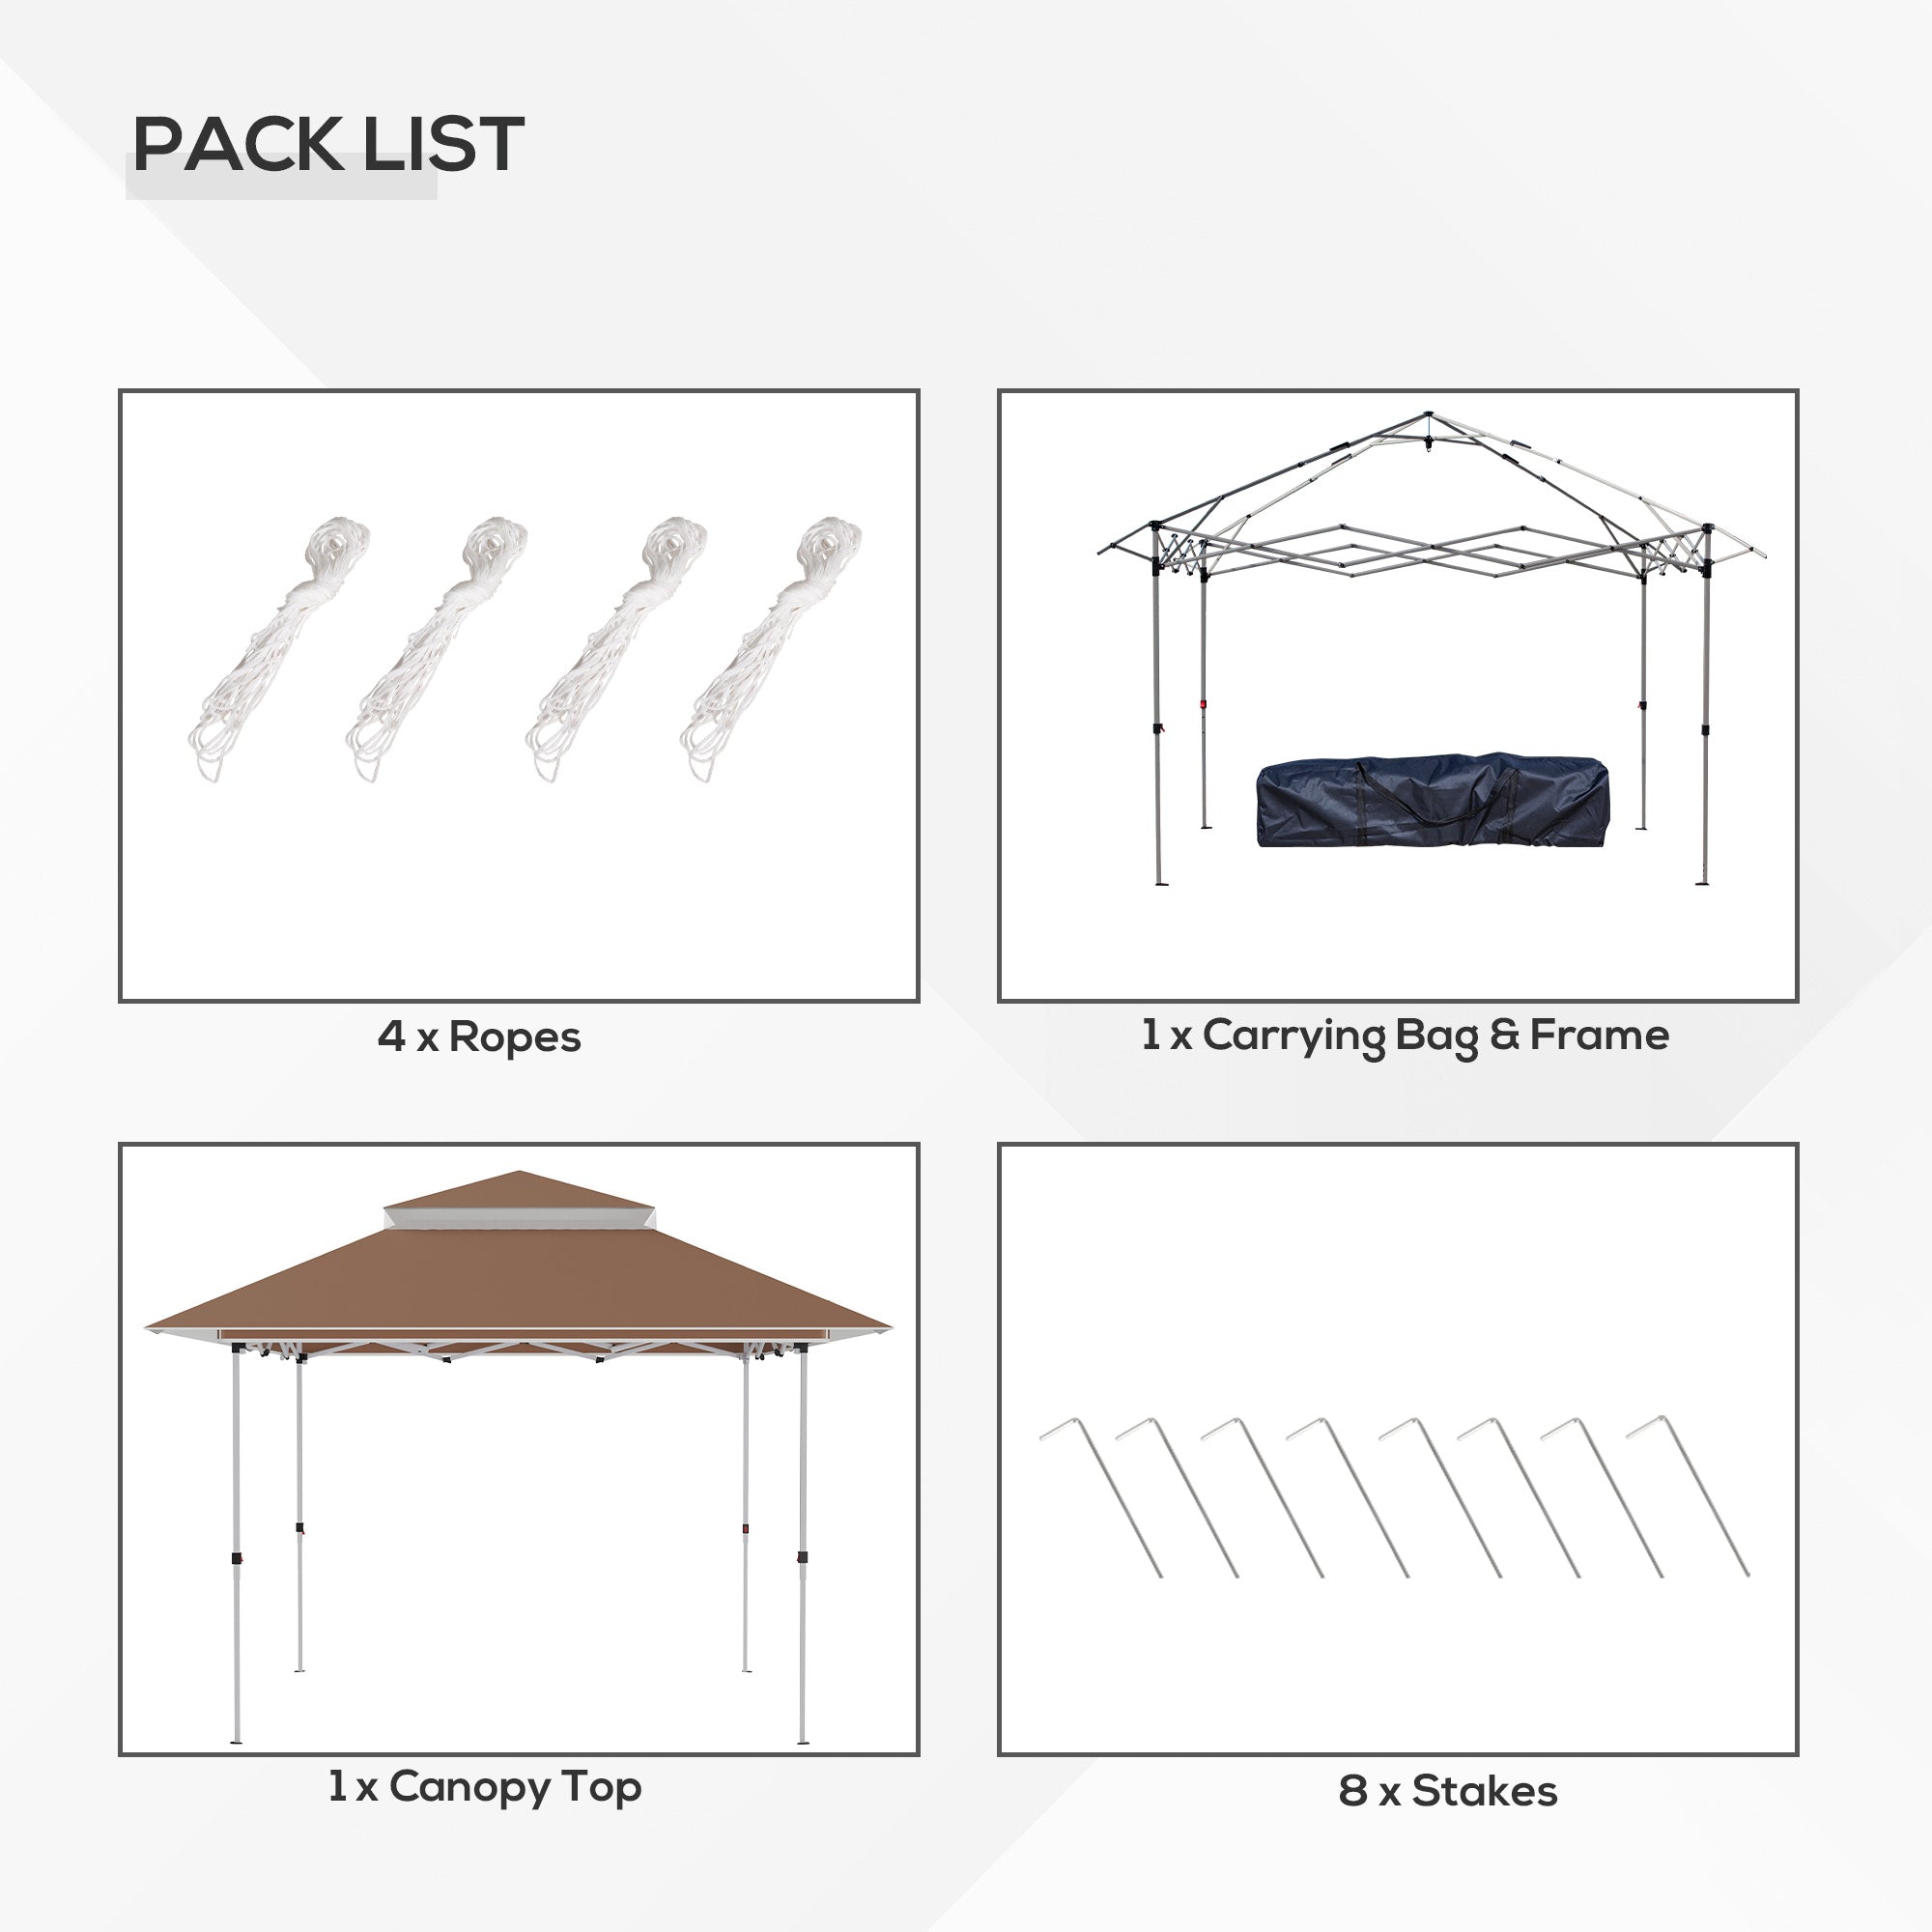 Outsunny 12' x 12' Pop Up Canopy Tent with Netting and Carry Bag, Instant Sun Shelter, Tents for Parties, Height Adjustable, for Outdoor, Garden, Patio, Khaki